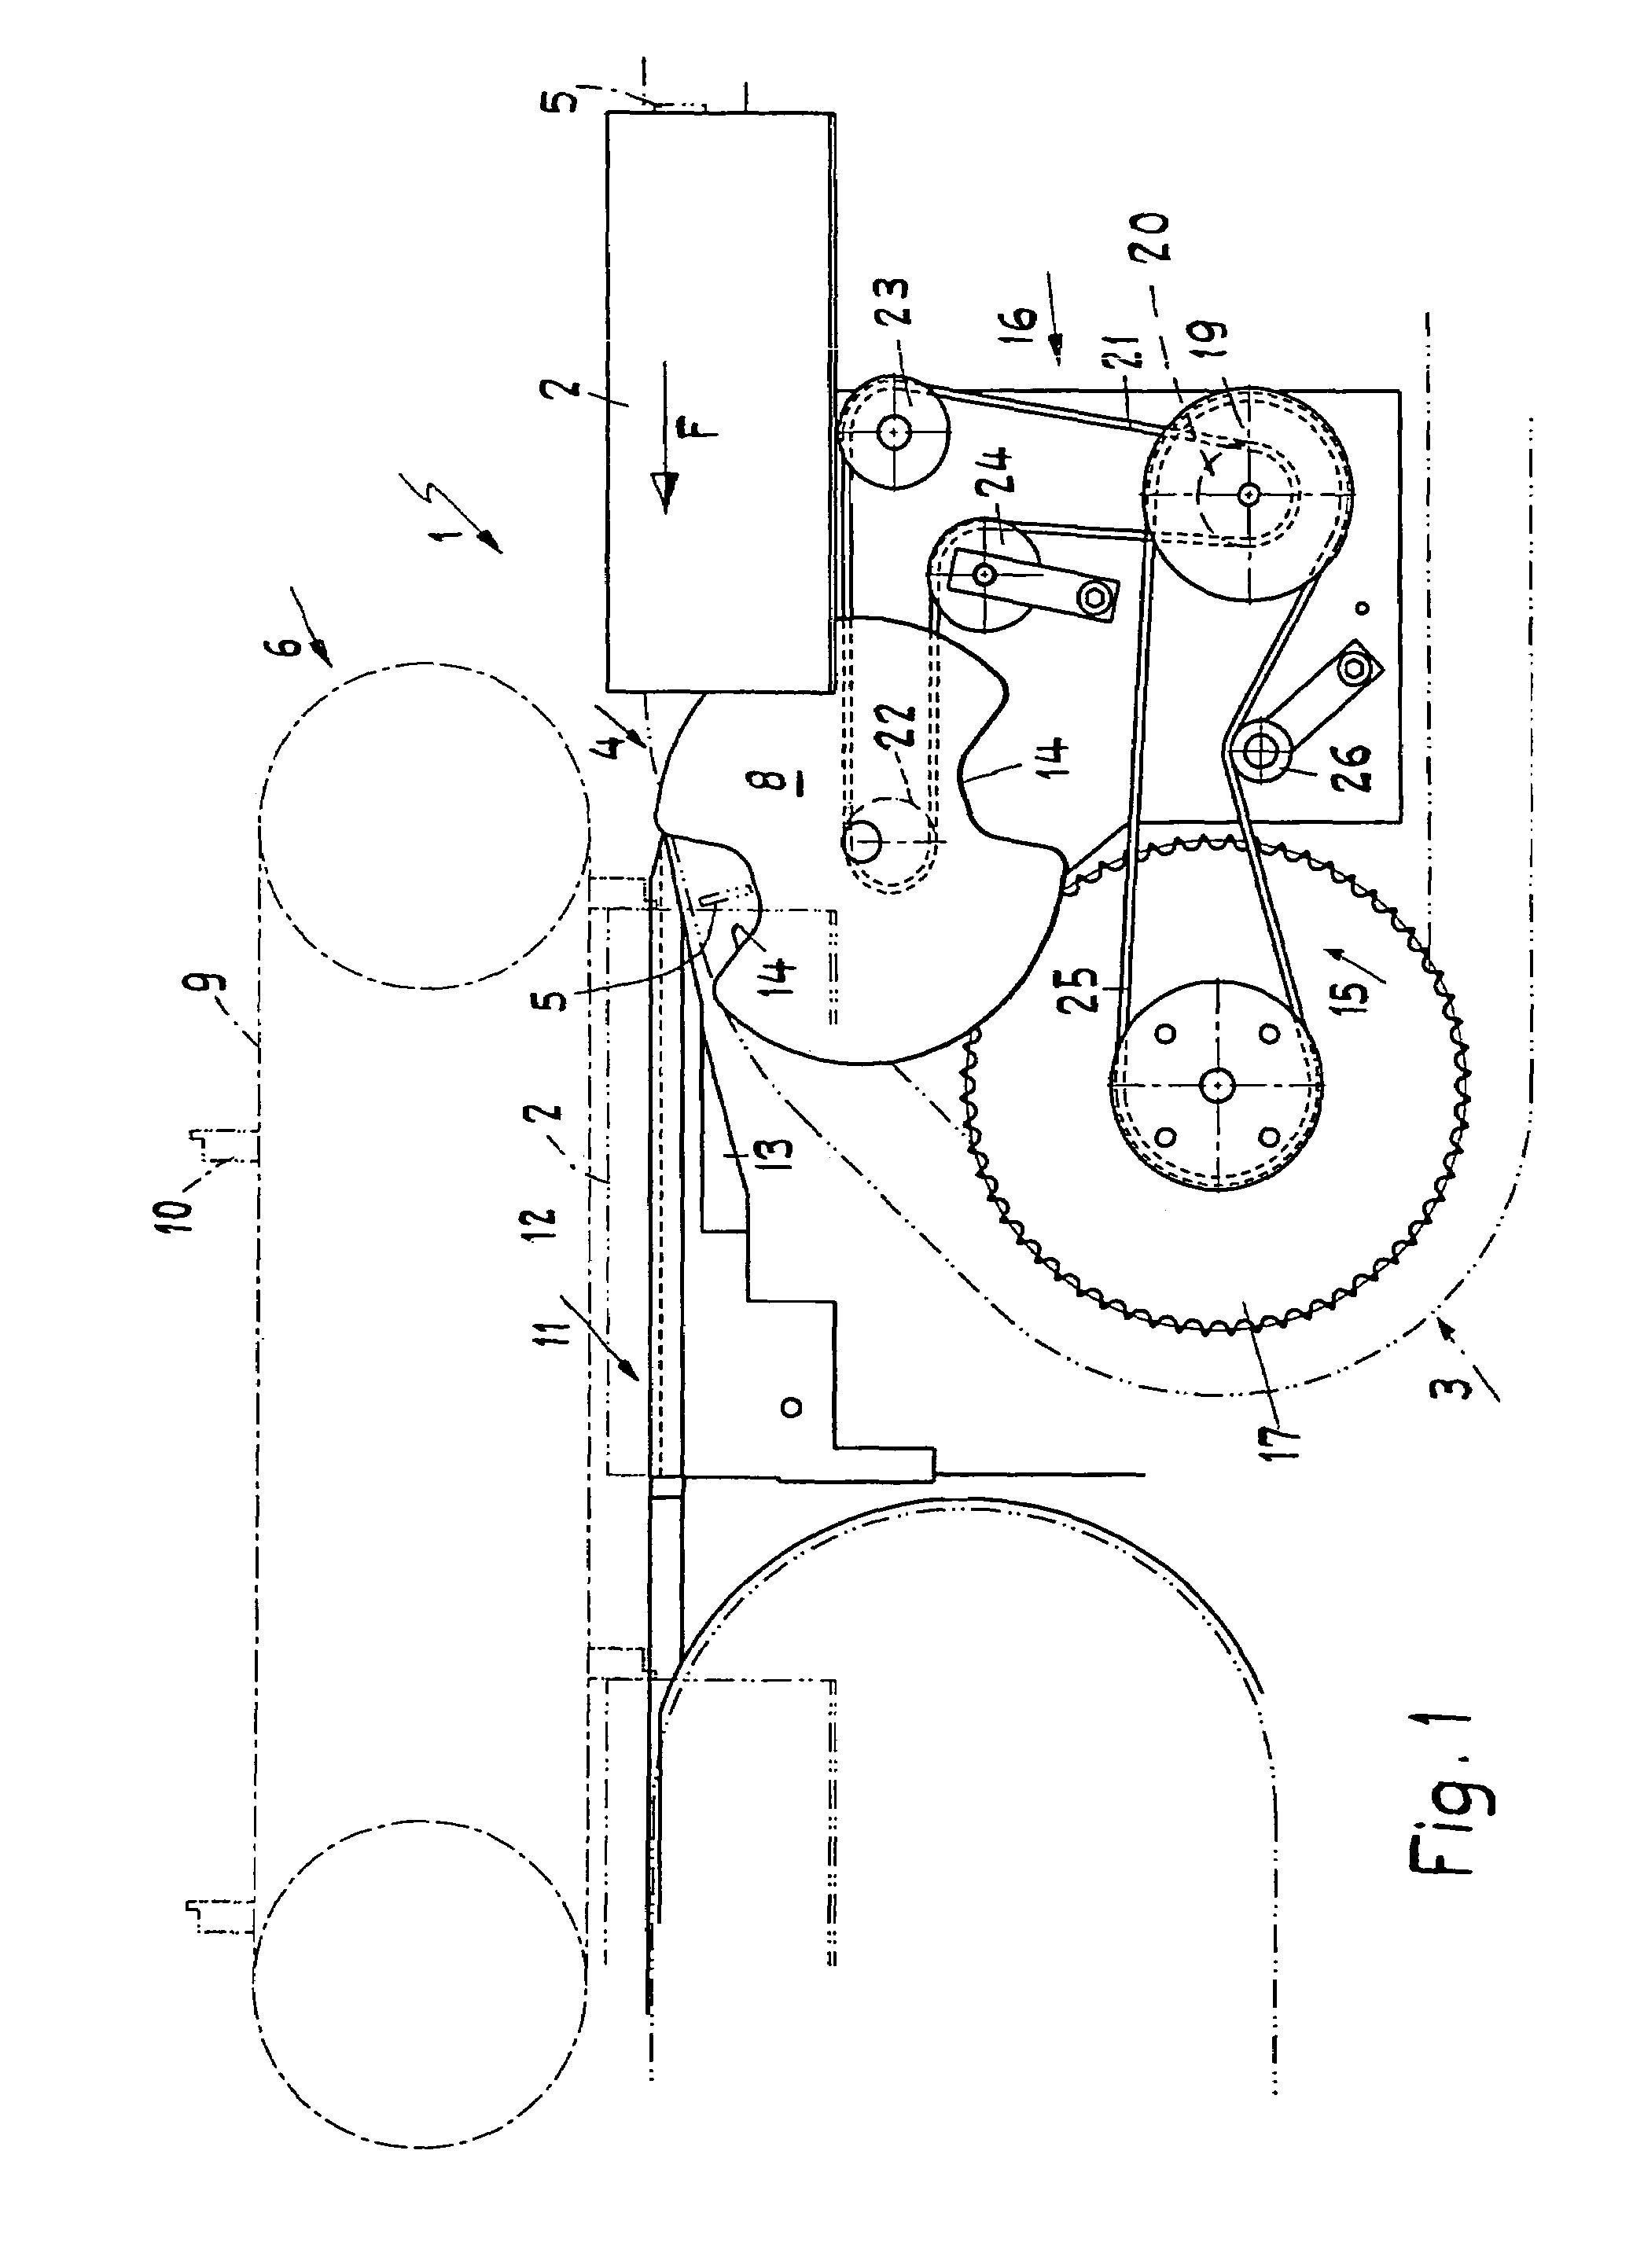 Apparatus for producing a bound print item